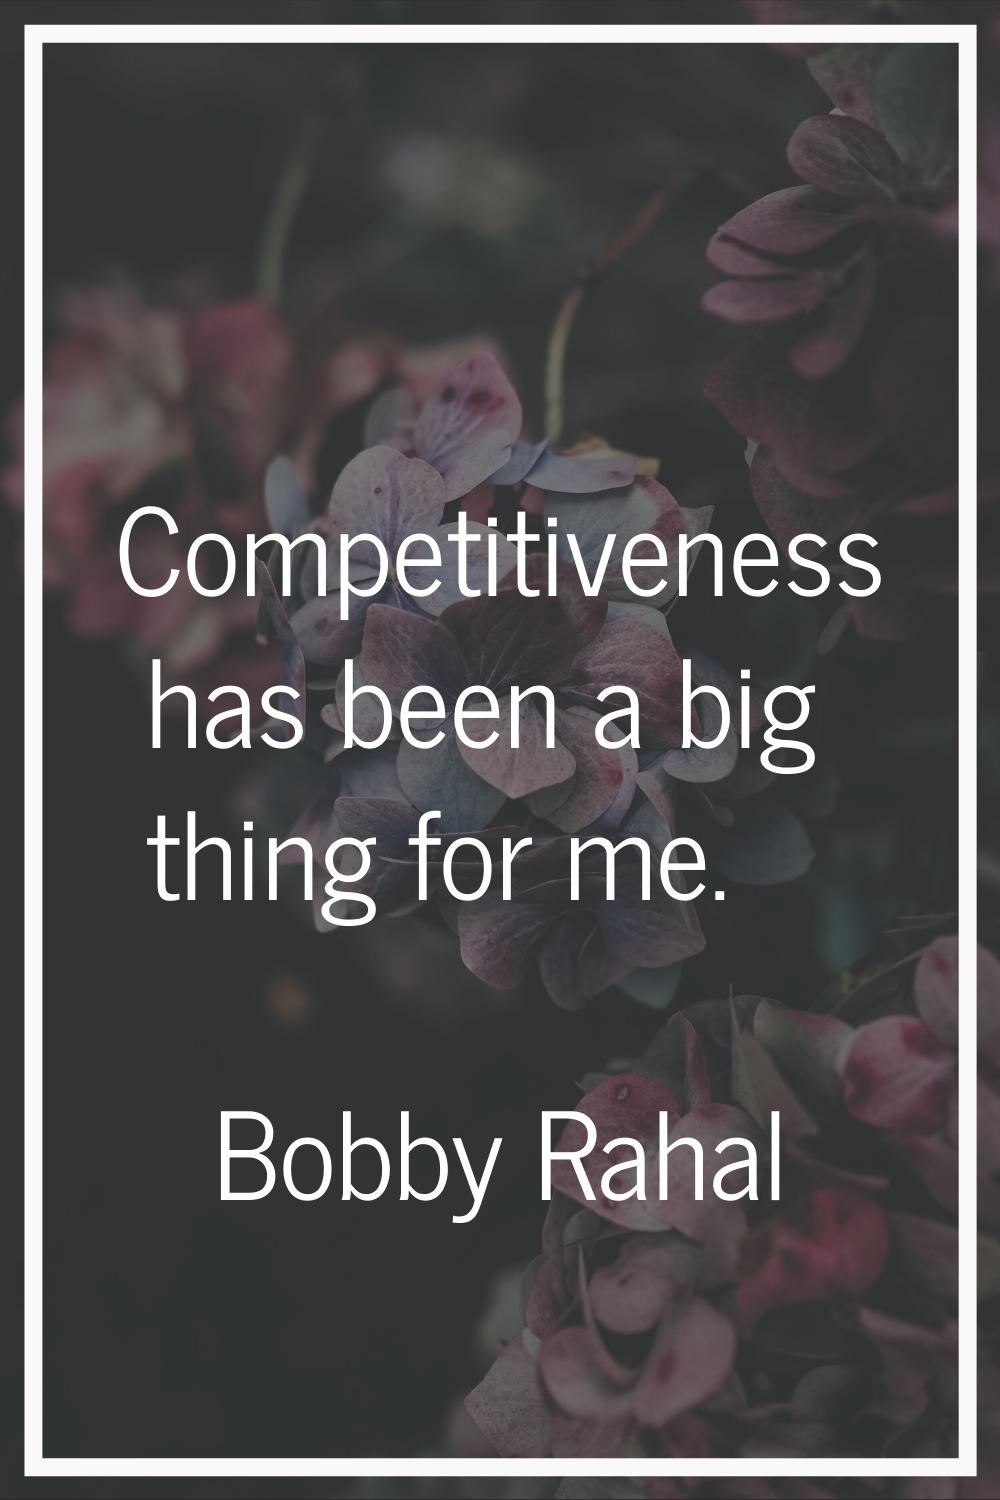 Competitiveness has been a big thing for me.